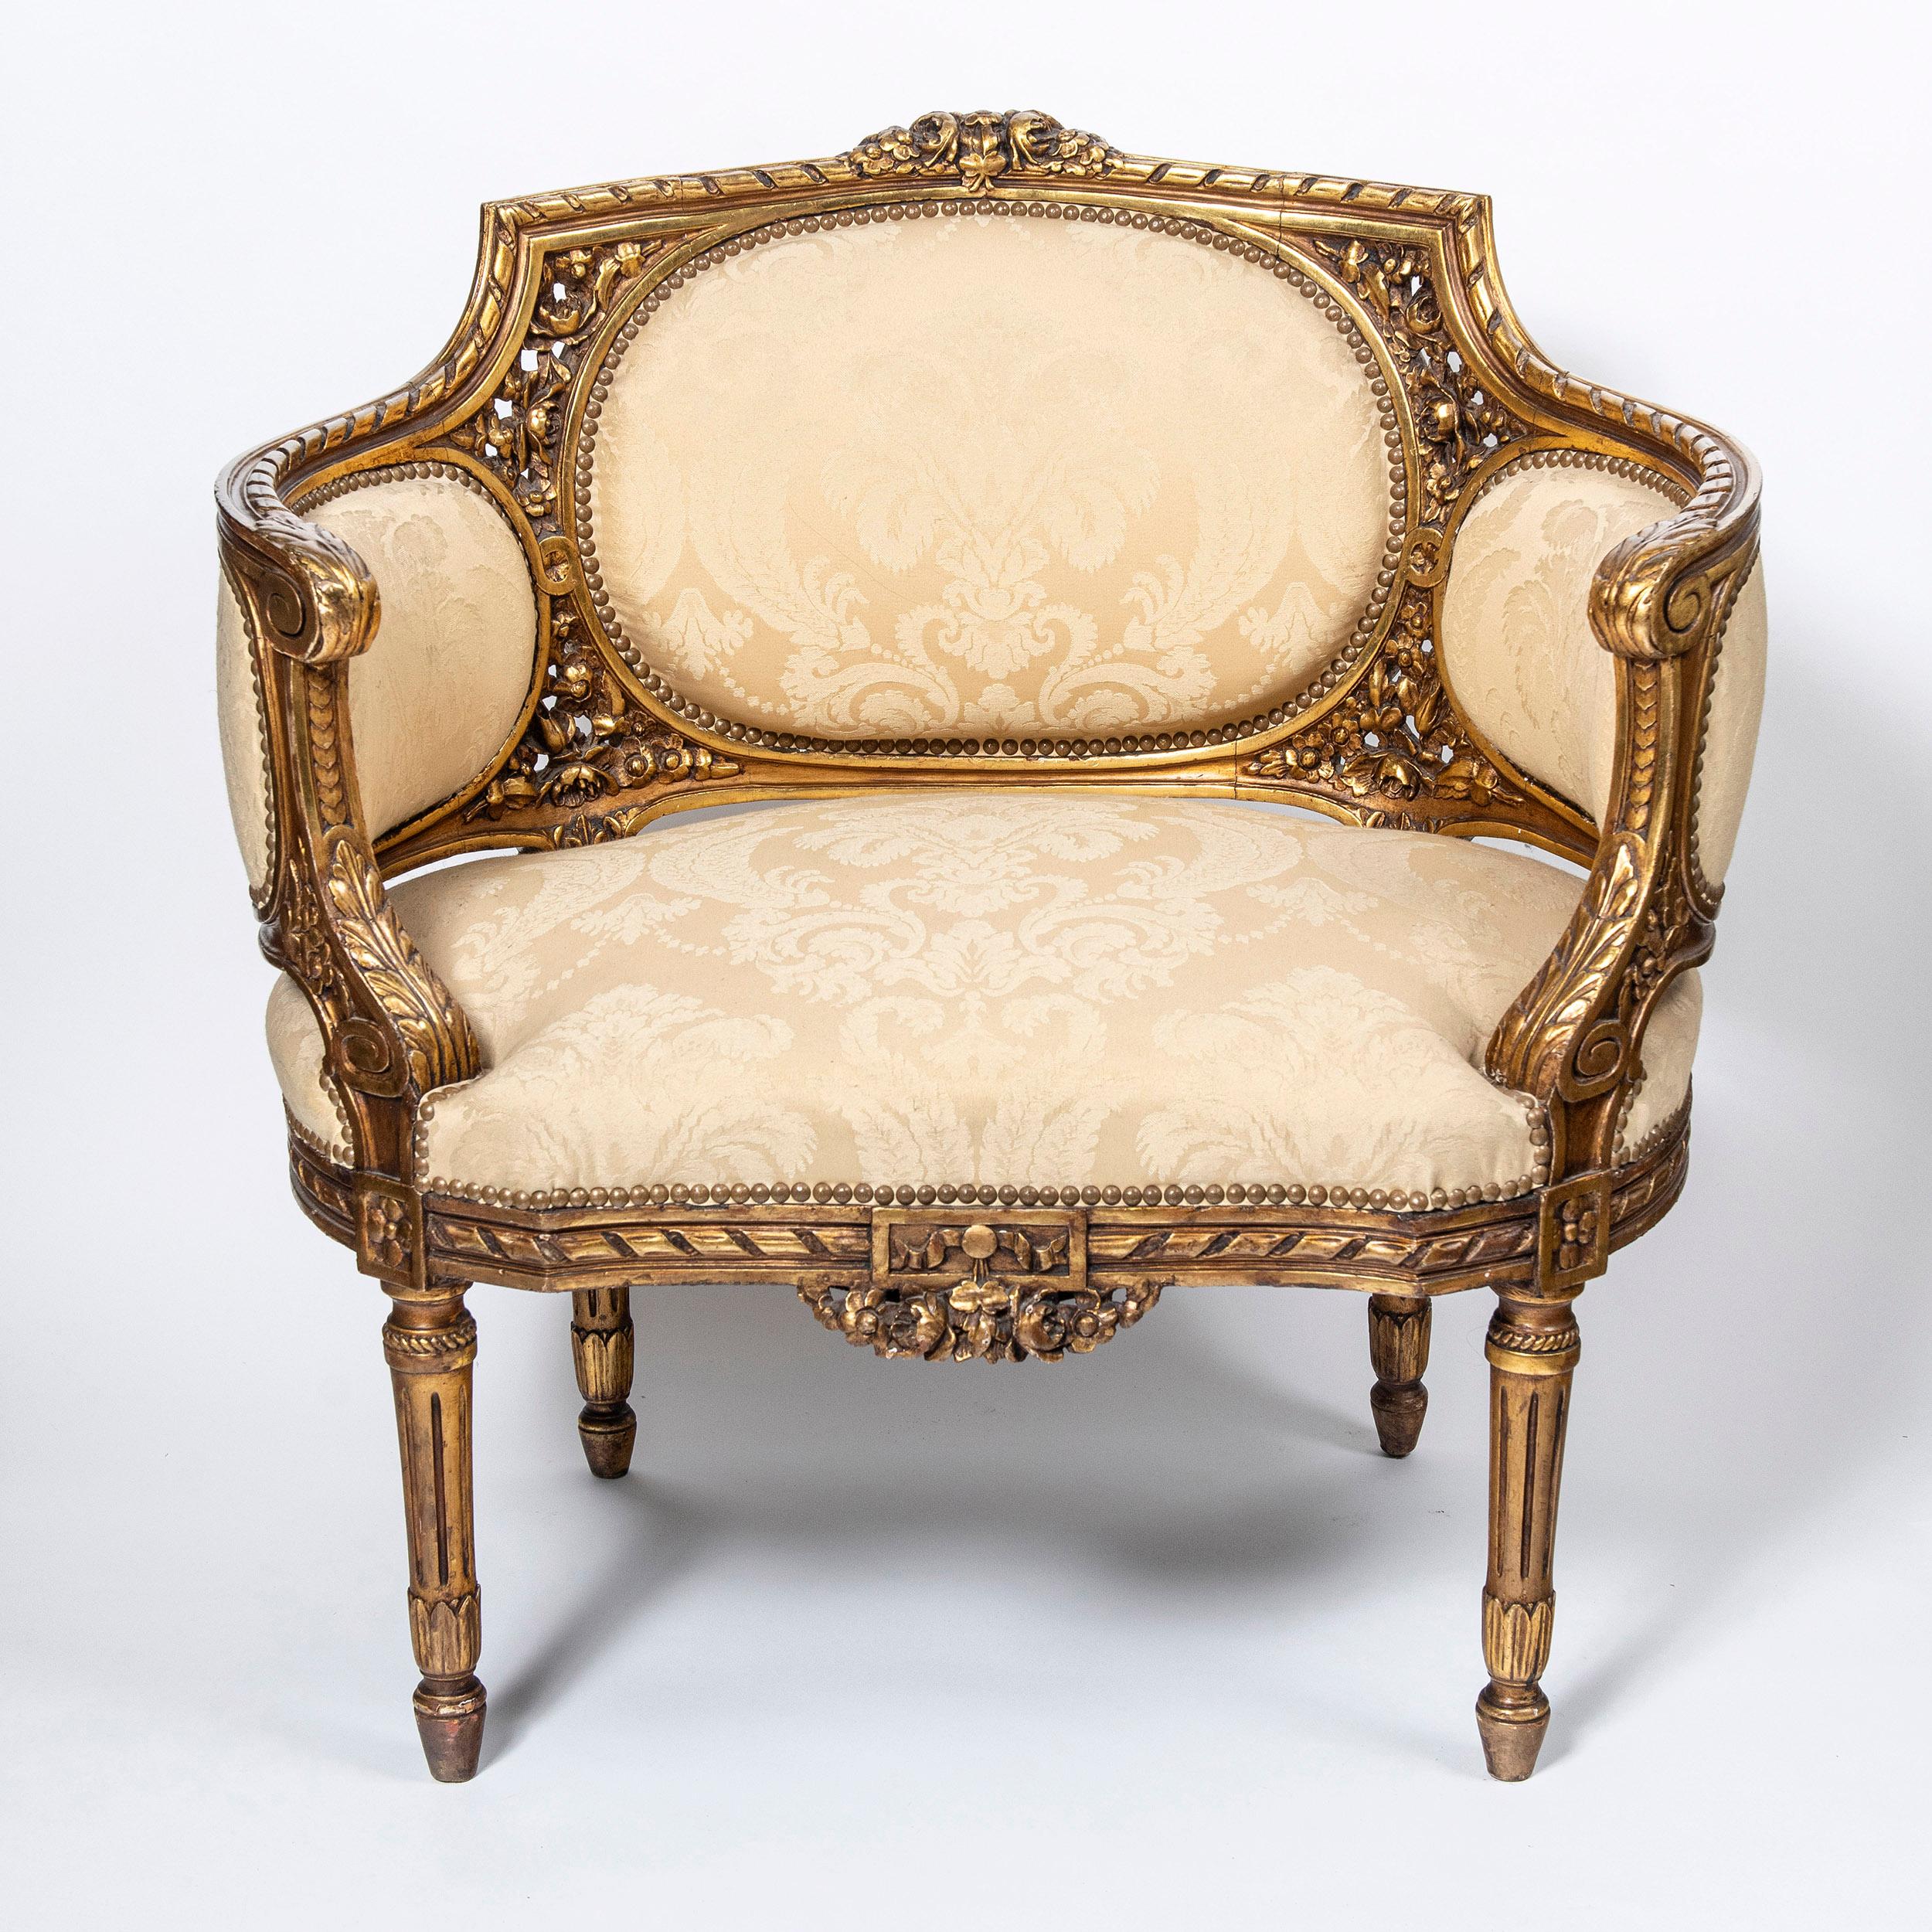 Wood and gold leaf three piece suite. France, late 19th century.
Attributed to Maison Jansen.

Dimensions:
Large sofa: 91 cm height, 137 cm width, 67 cm depth, 48 cm seat height.
Side chairs: 82 cm height, 80 cm width, 60 cm depth, 40 cm seat